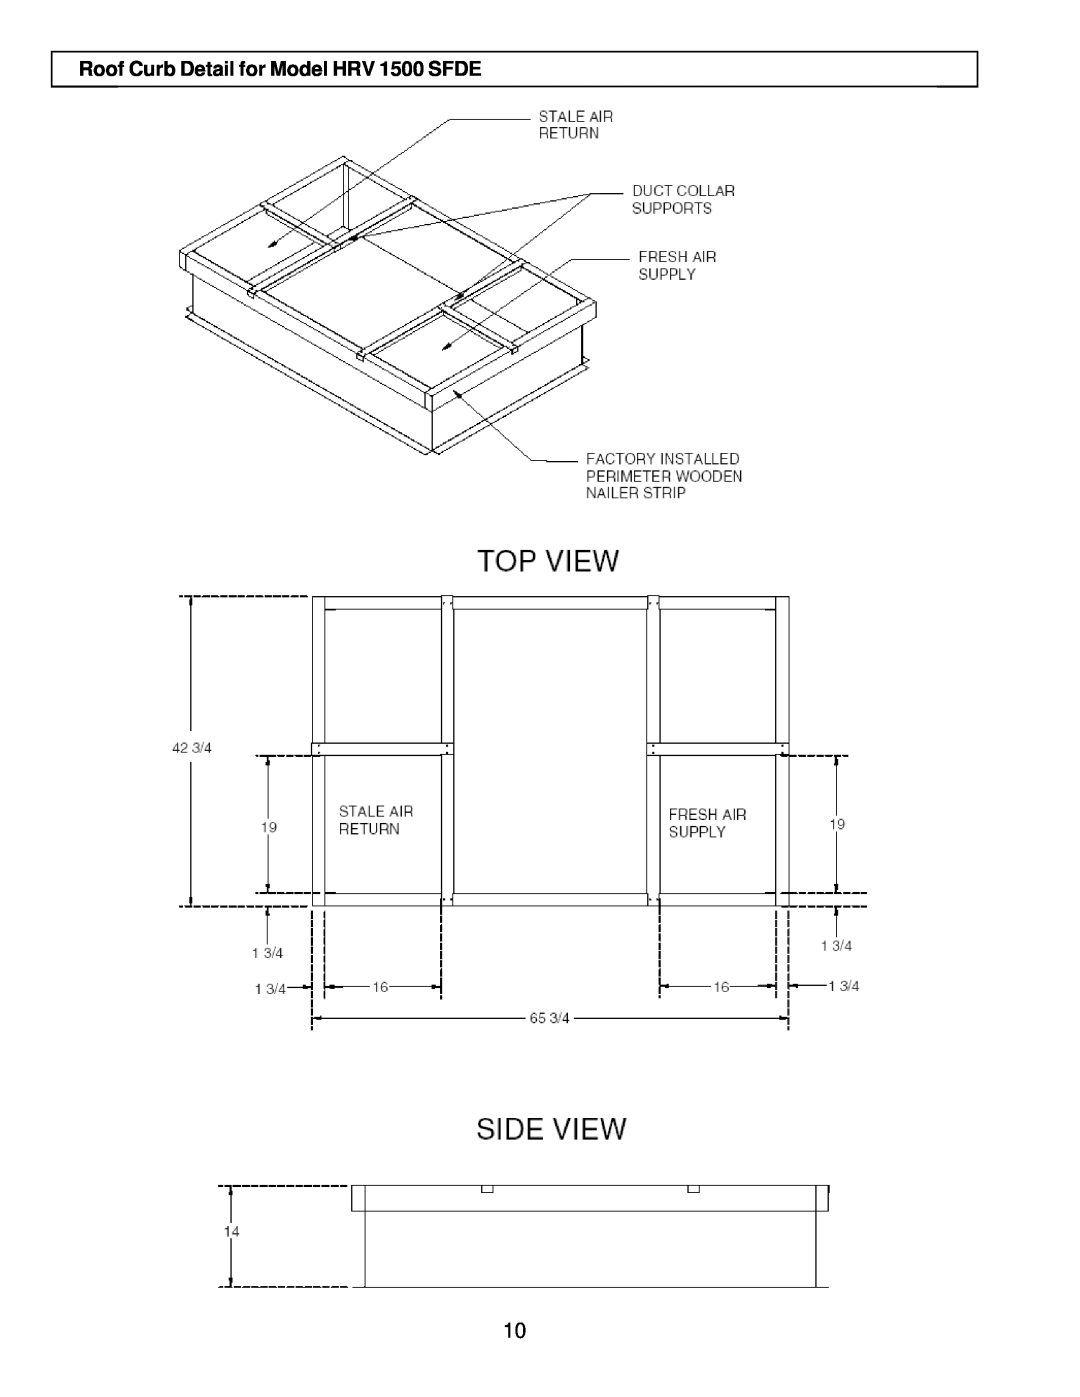 American Aldes installation manual Roof Curb Detail for Model HRV 1500 SFDE 